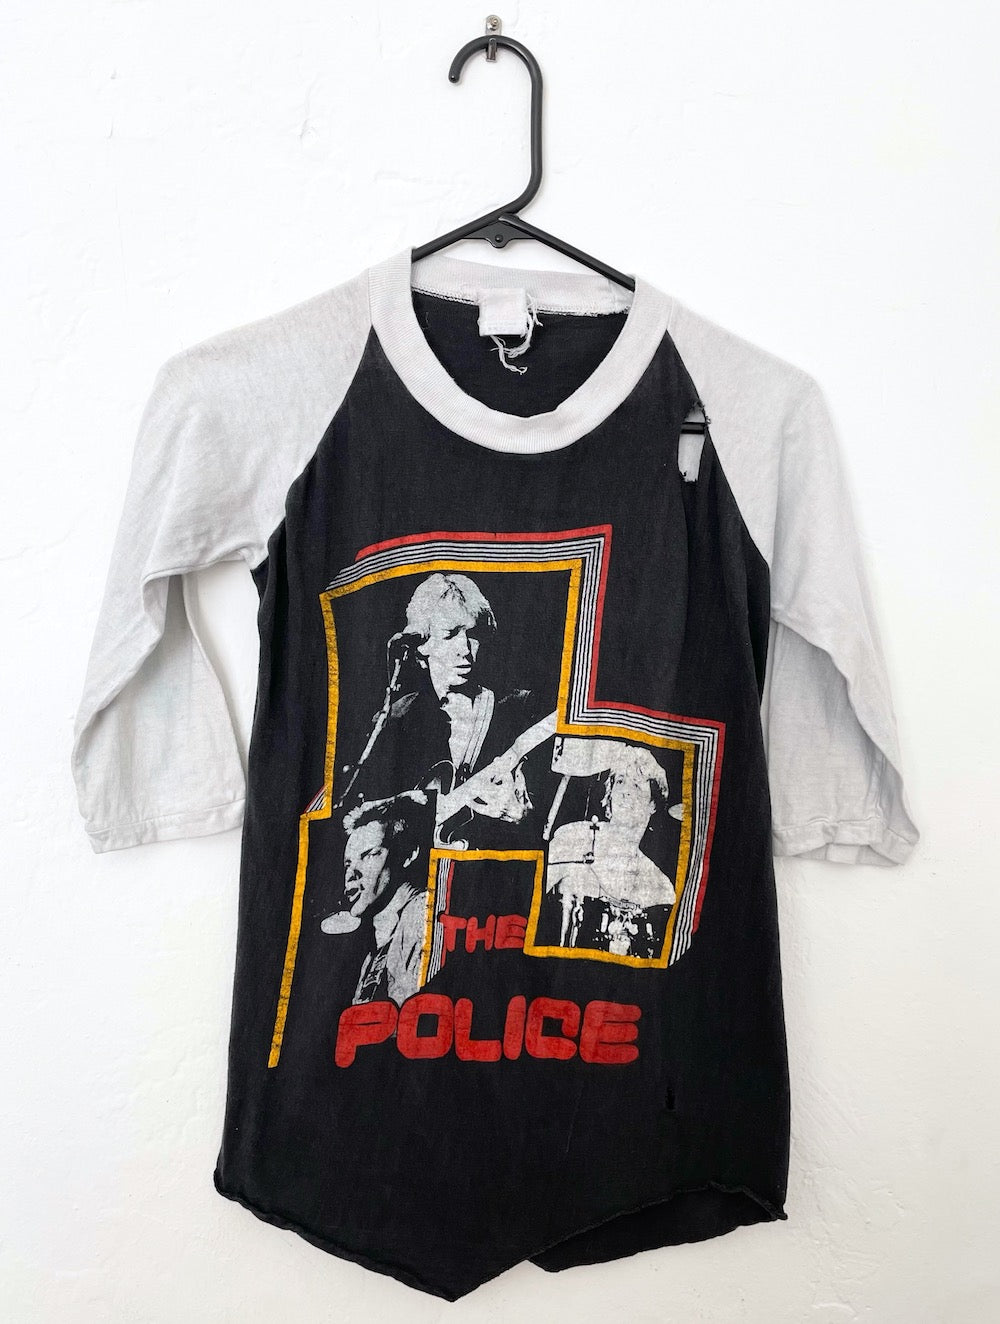 Vintage 80s Super Distressed Black and Grey The Police Baseball  Concert Band Tee Small